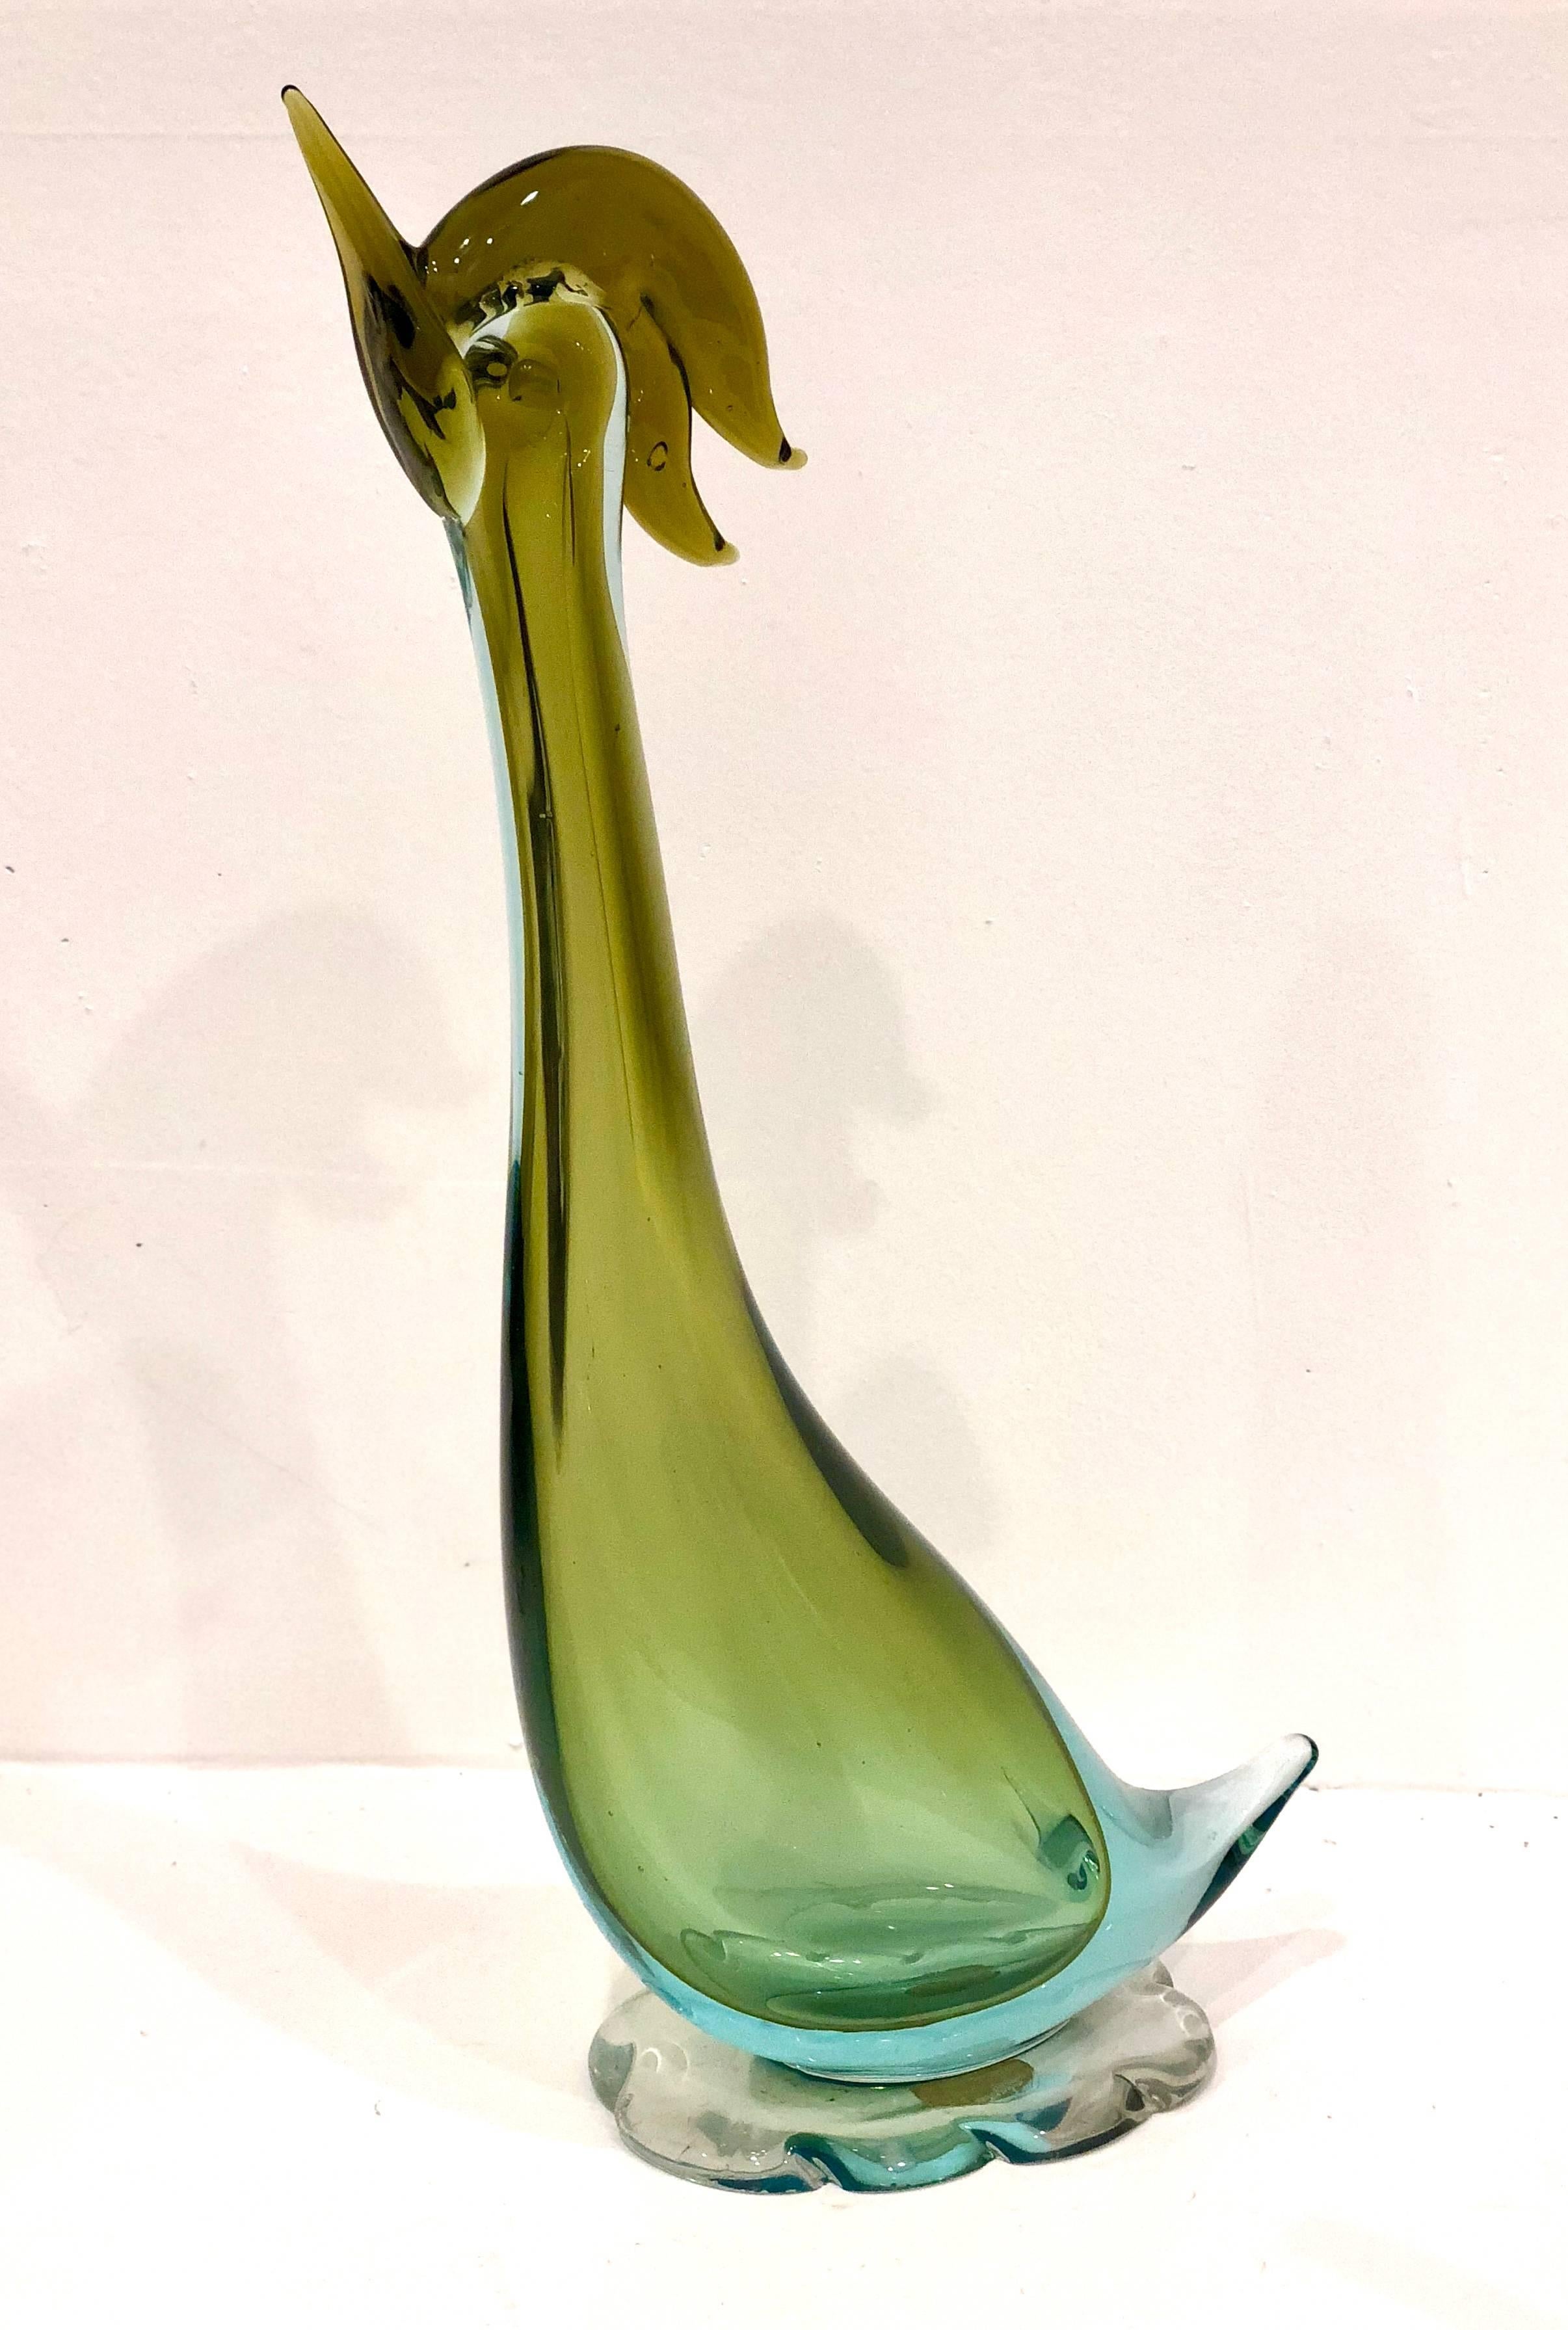 Beautiful Murano glass bird sculpture nice colors, and condition no chips or cracks, circa 1950s, retains its label.